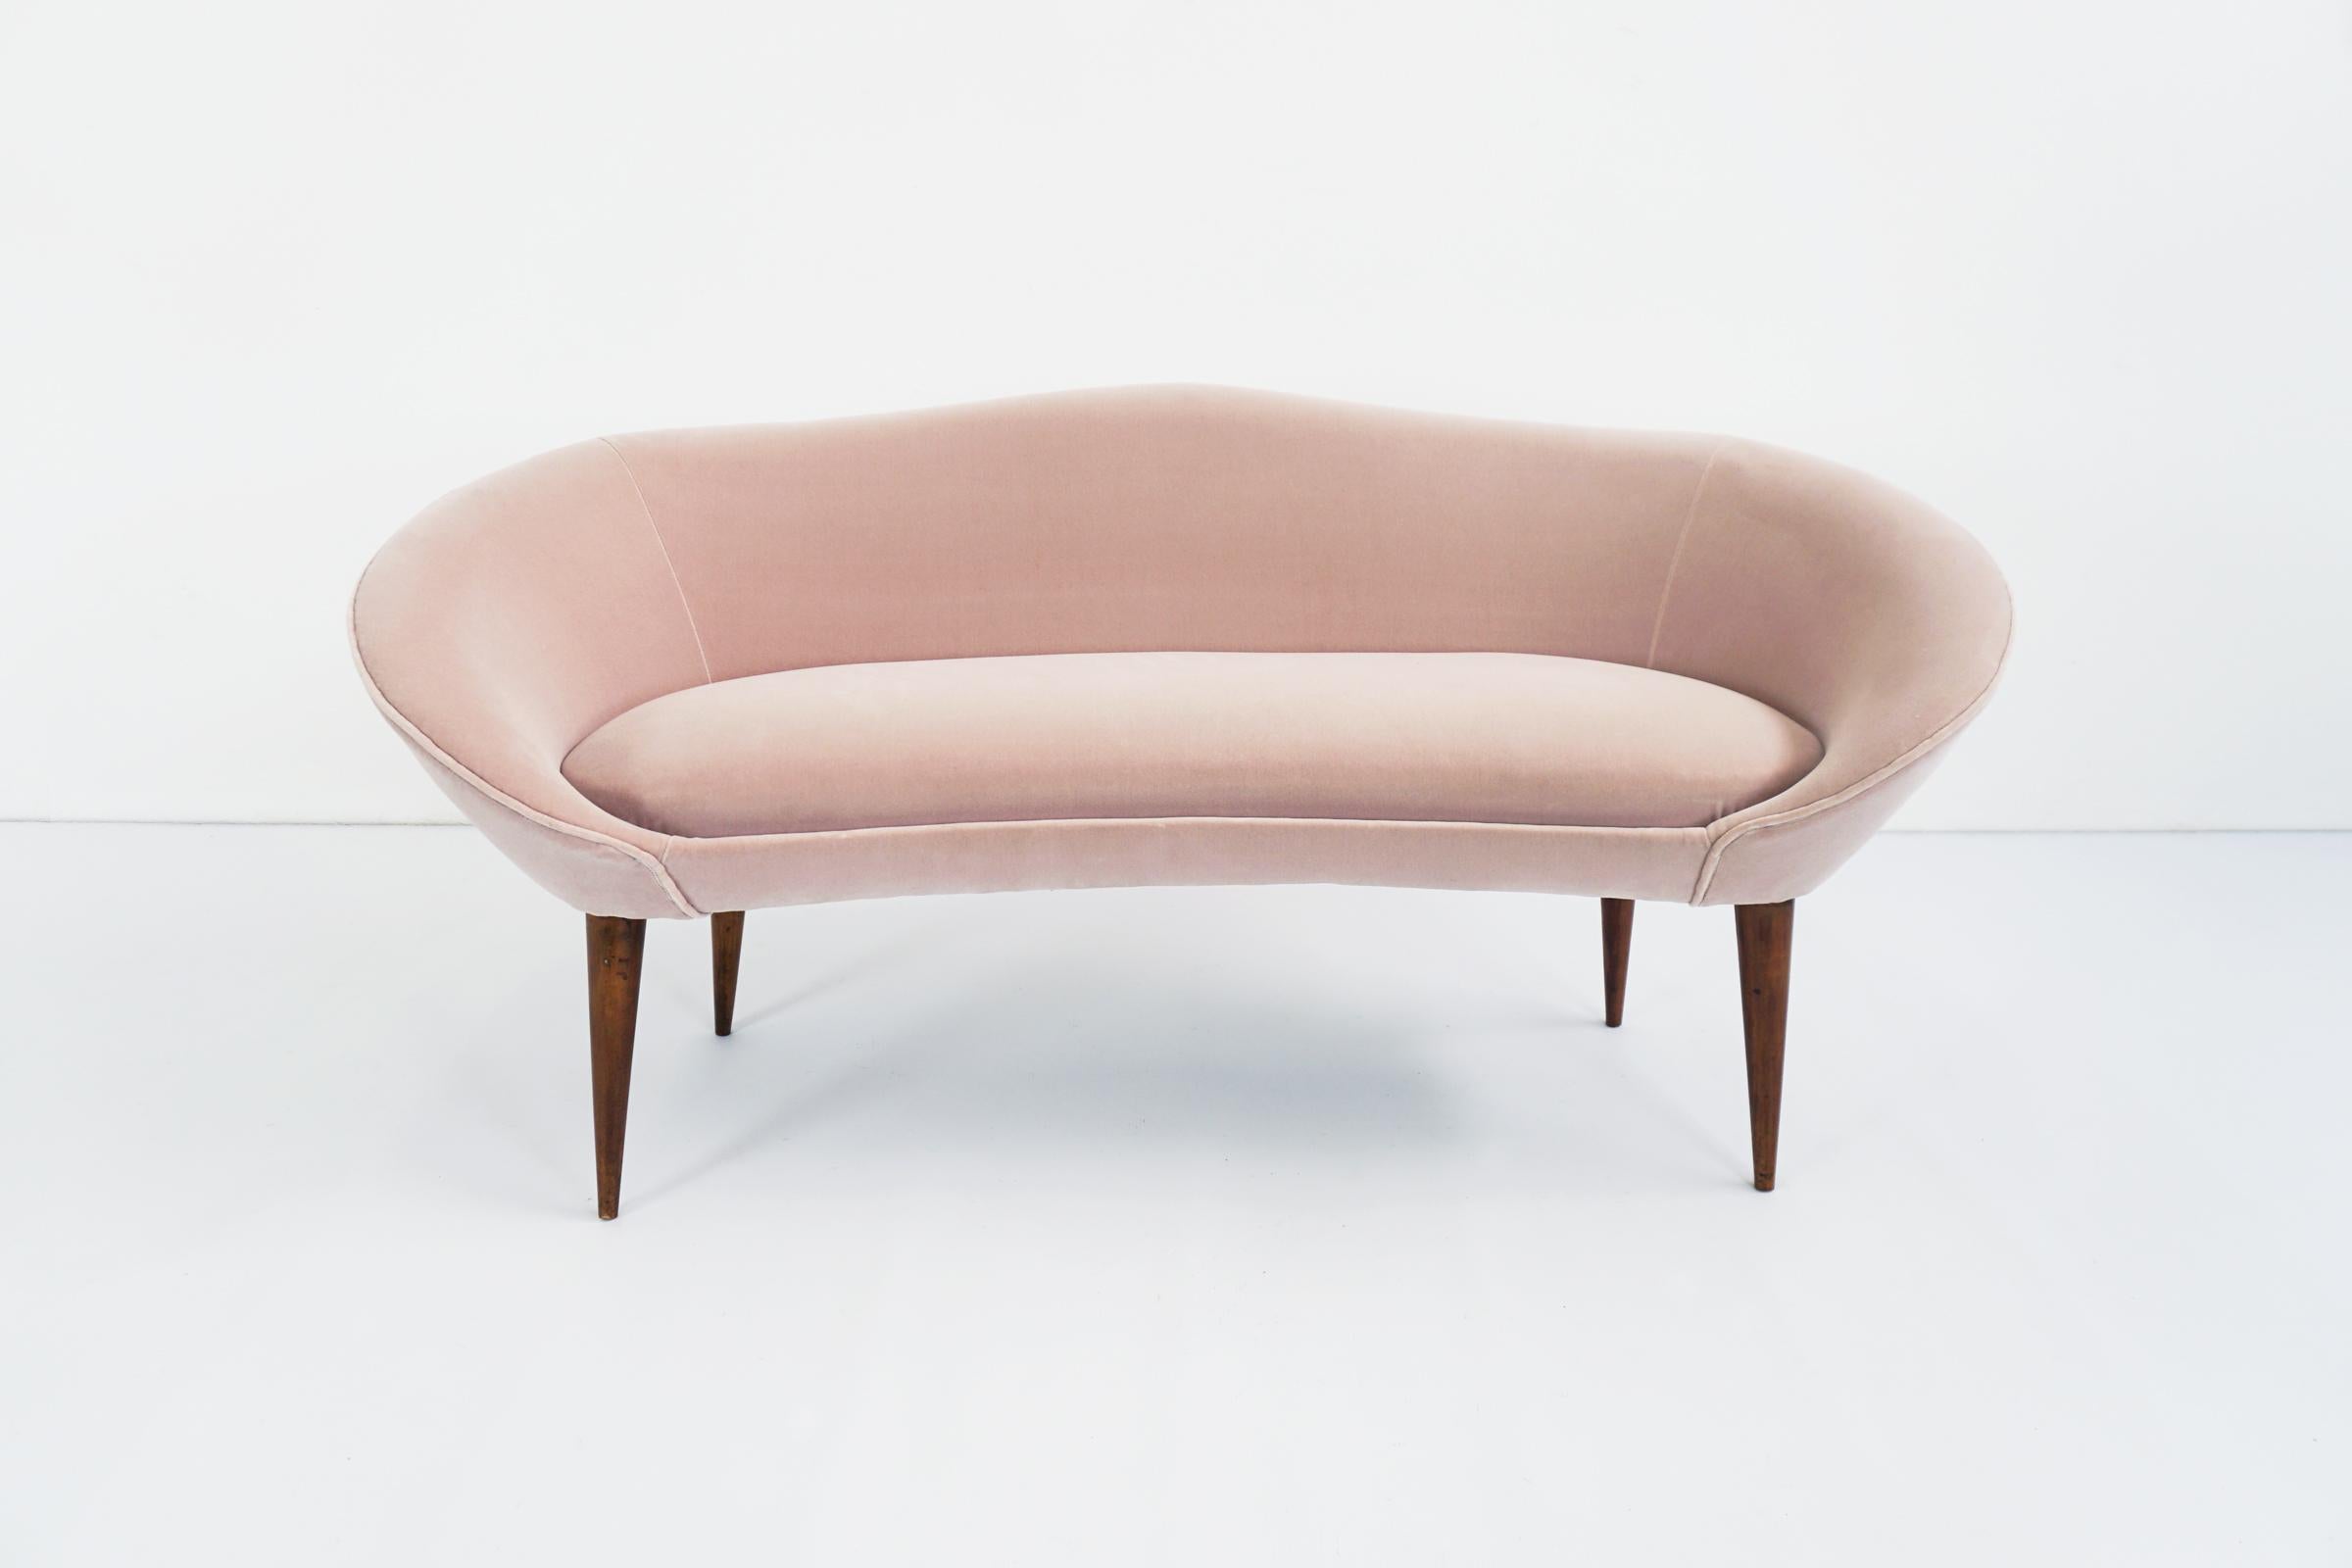 Beautiful small sofa bench totally reupholstered in pale powder rose velvet.